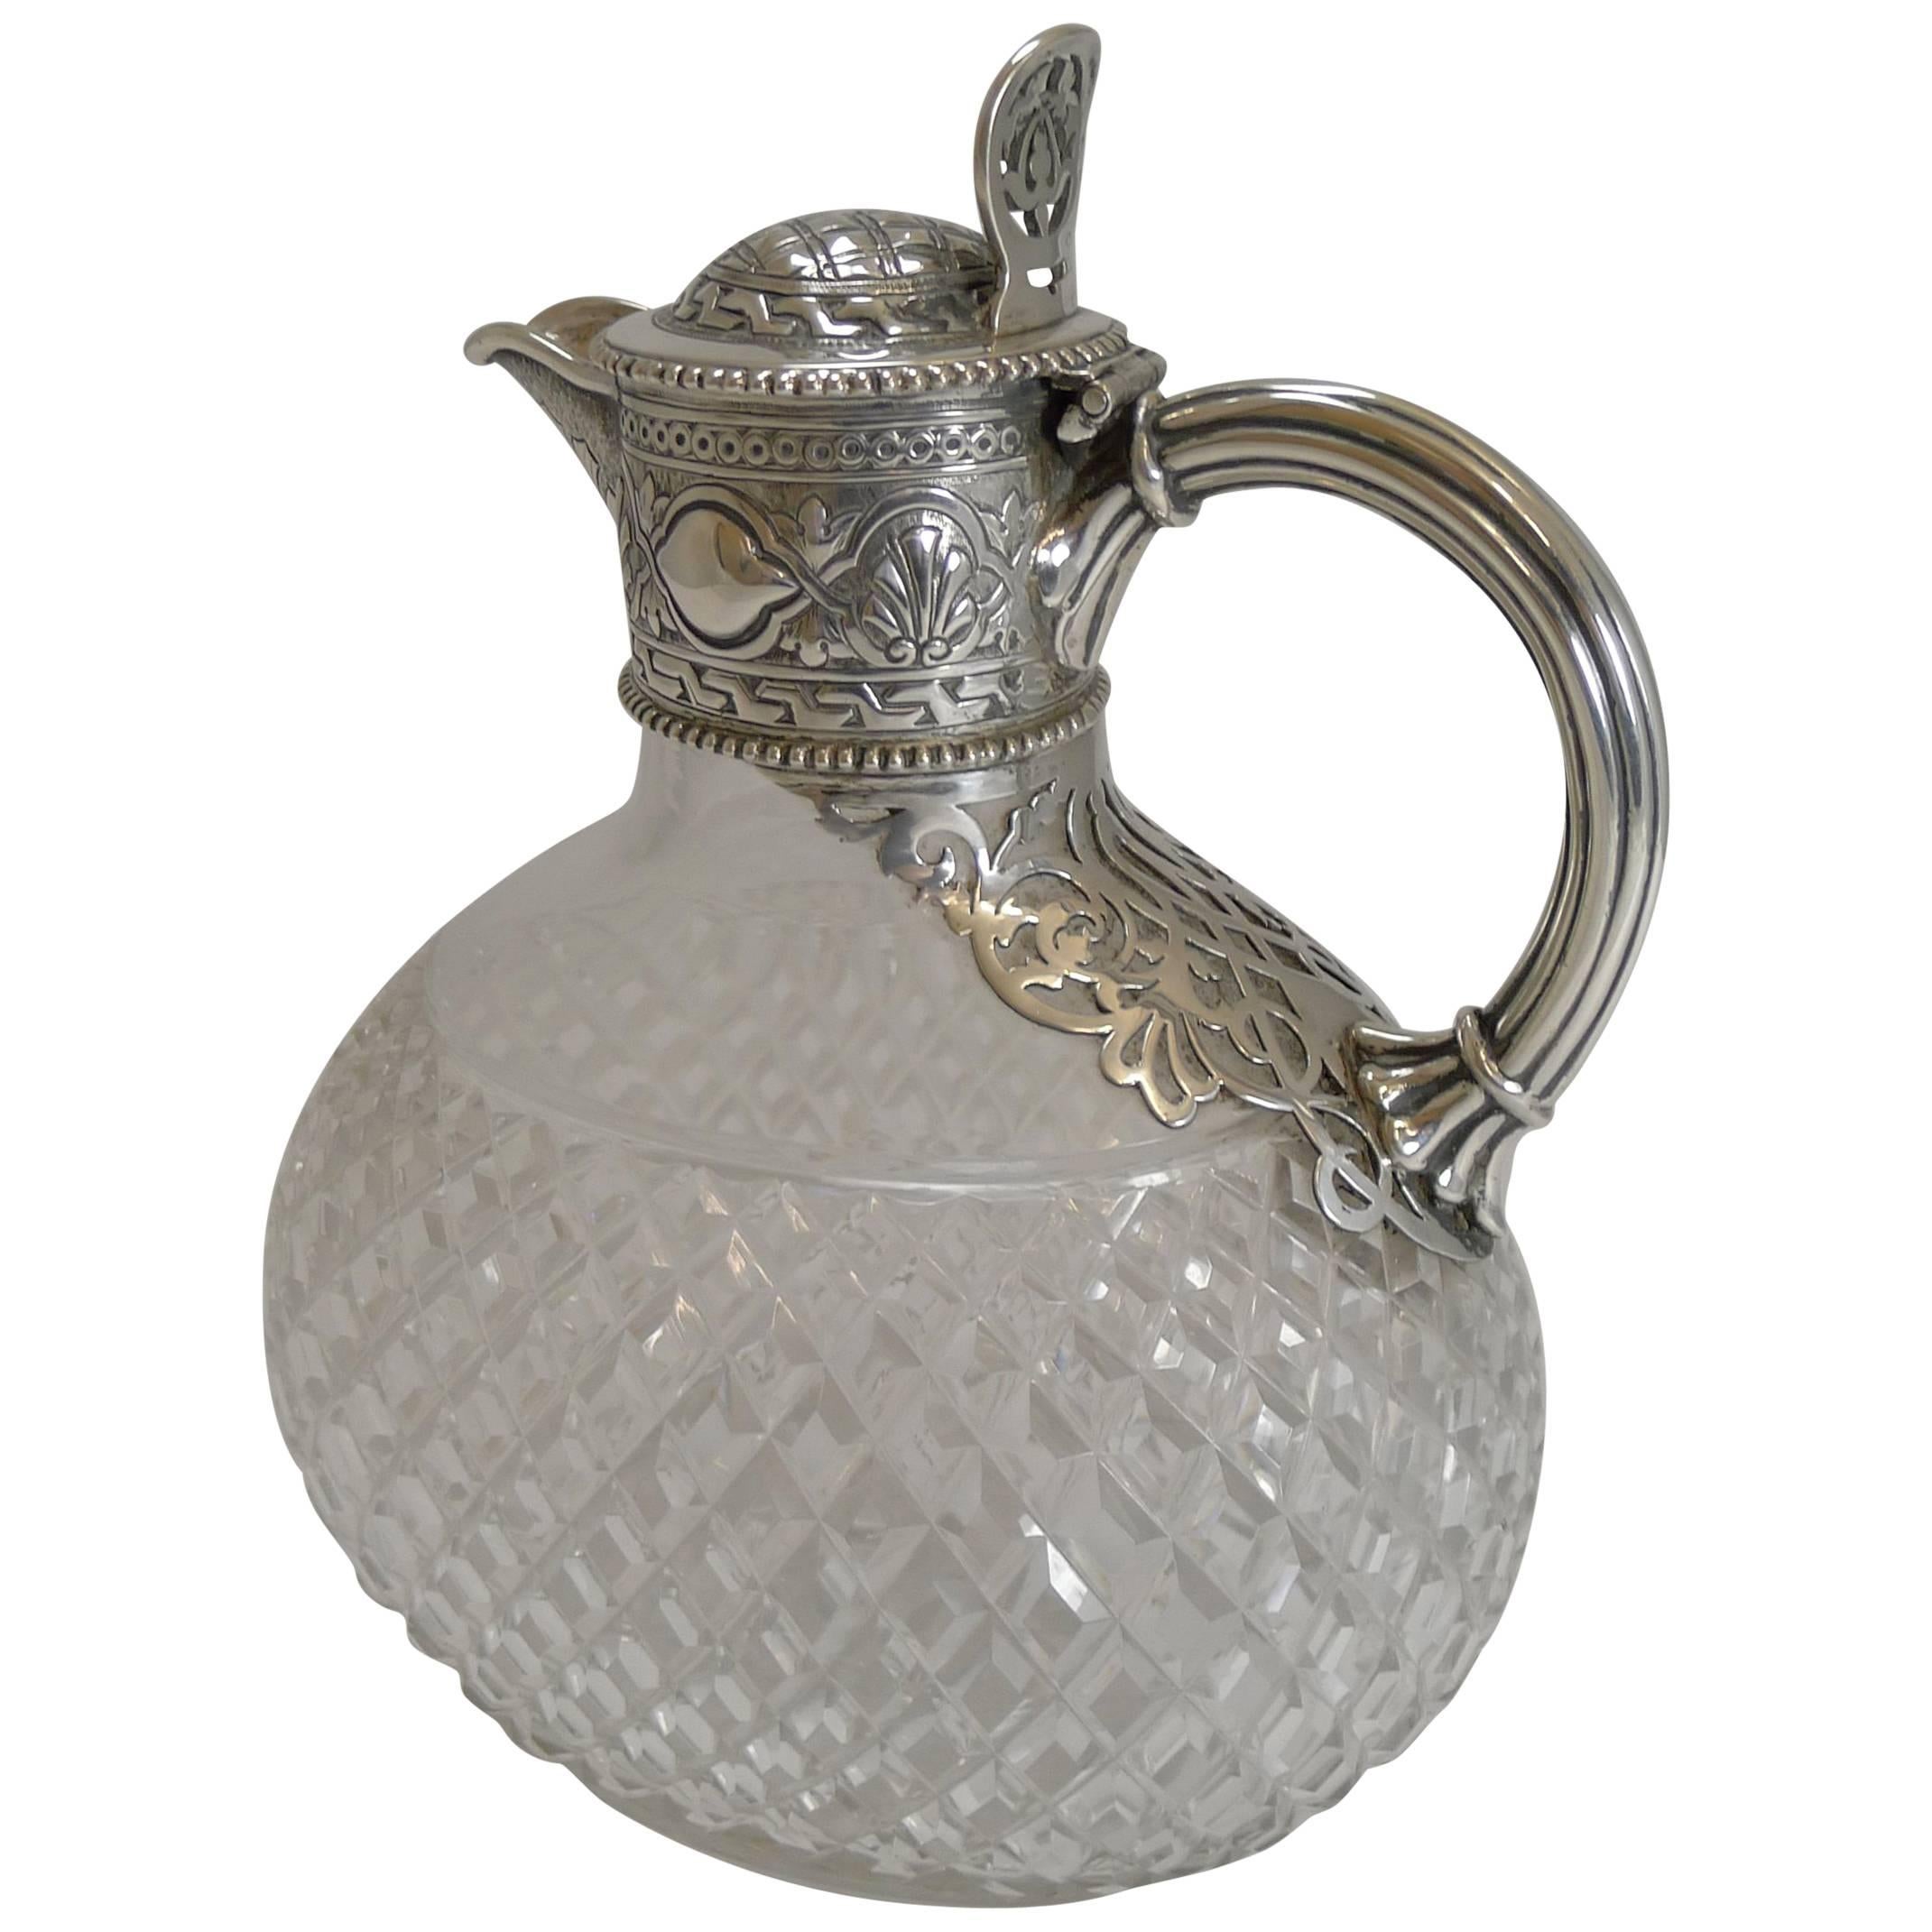 Victorian English Cut Crystal and Sterling Silver Claret or Wine Jug, 1863